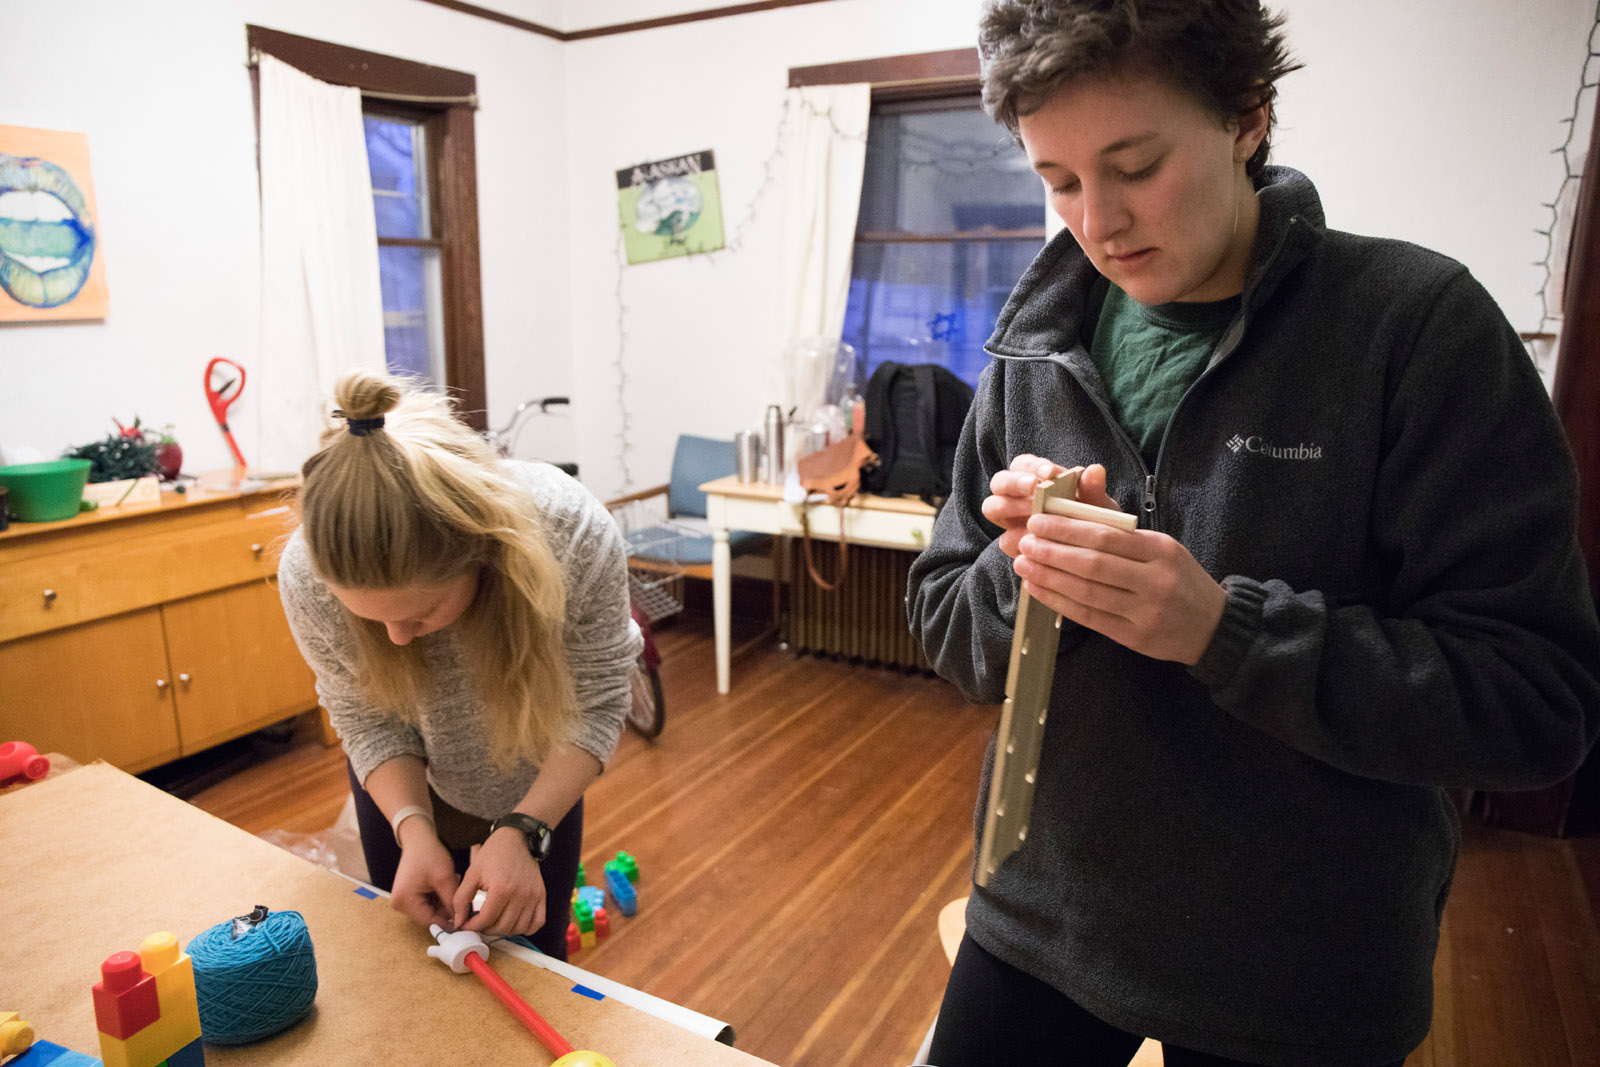 Team Momentics members <strong>Anna Gilbertson ’19</strong> and <strong>Alana Aamodt ’18</strong> work on their Rube Goldberg machine to perfect it for their pitch demonstration.